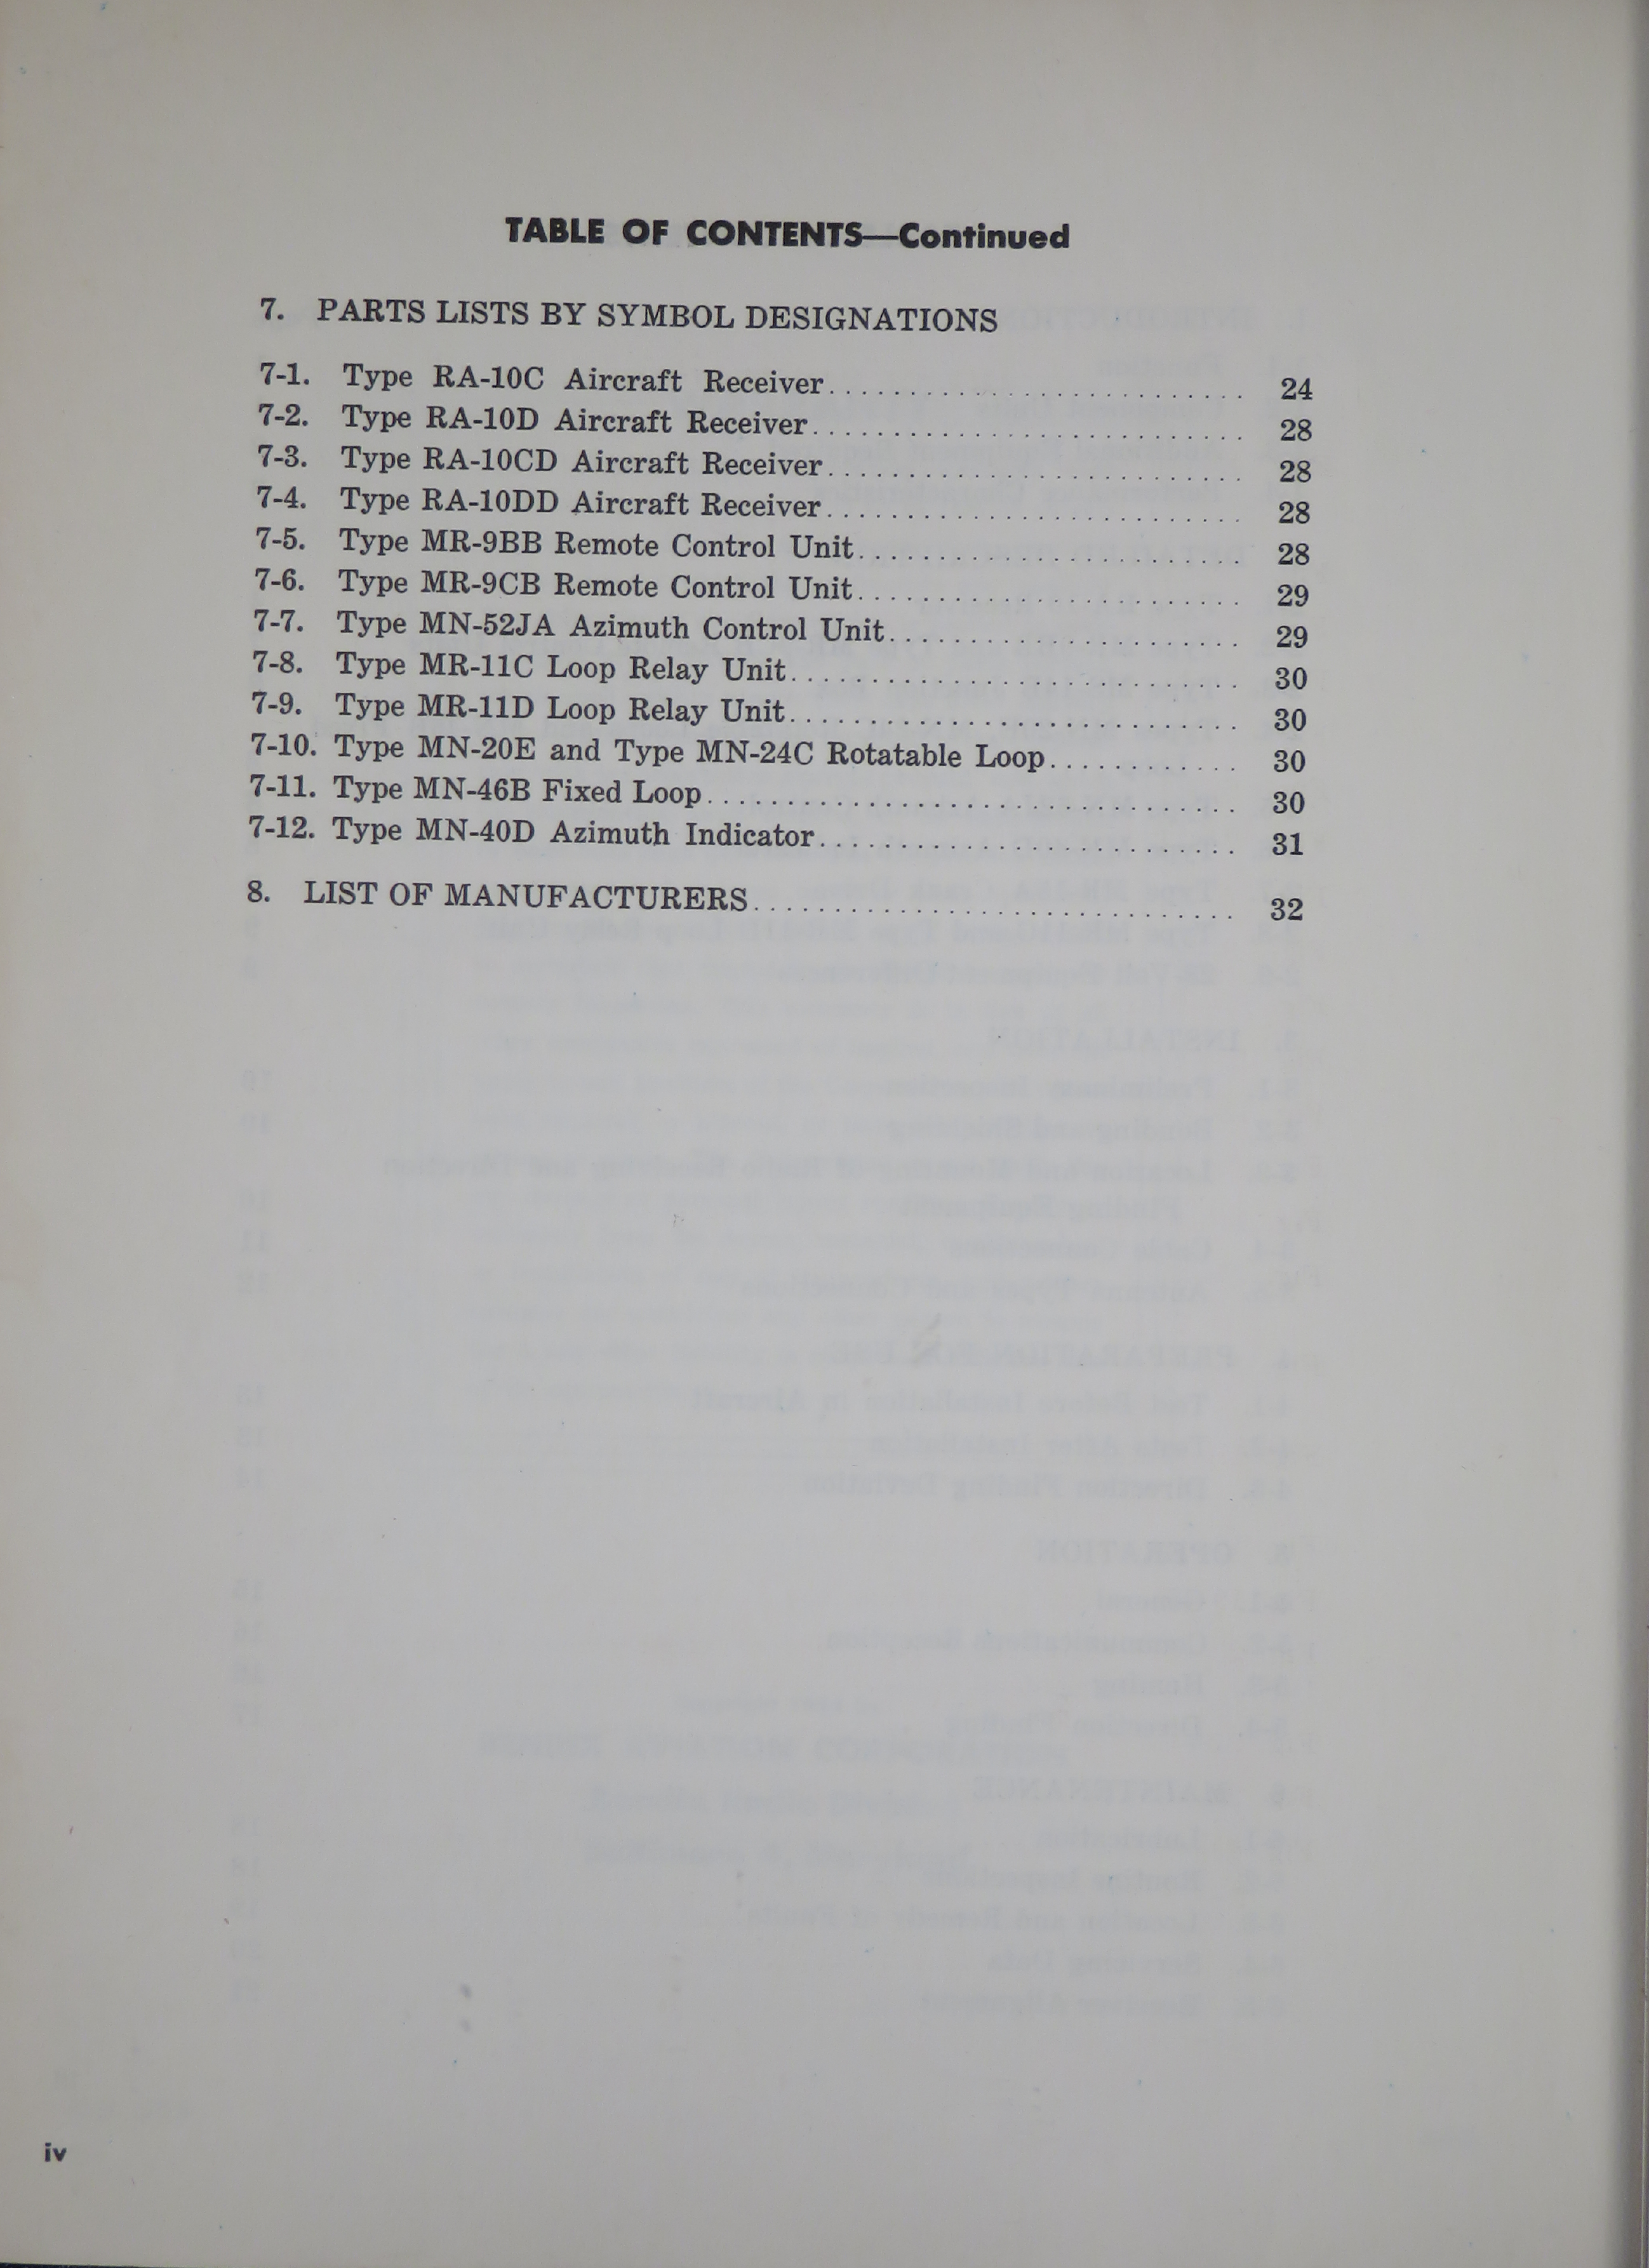 Sample page 6 from AirCorps Library document: Instruction Book for RA-10 Aircraft Receiving Equipments